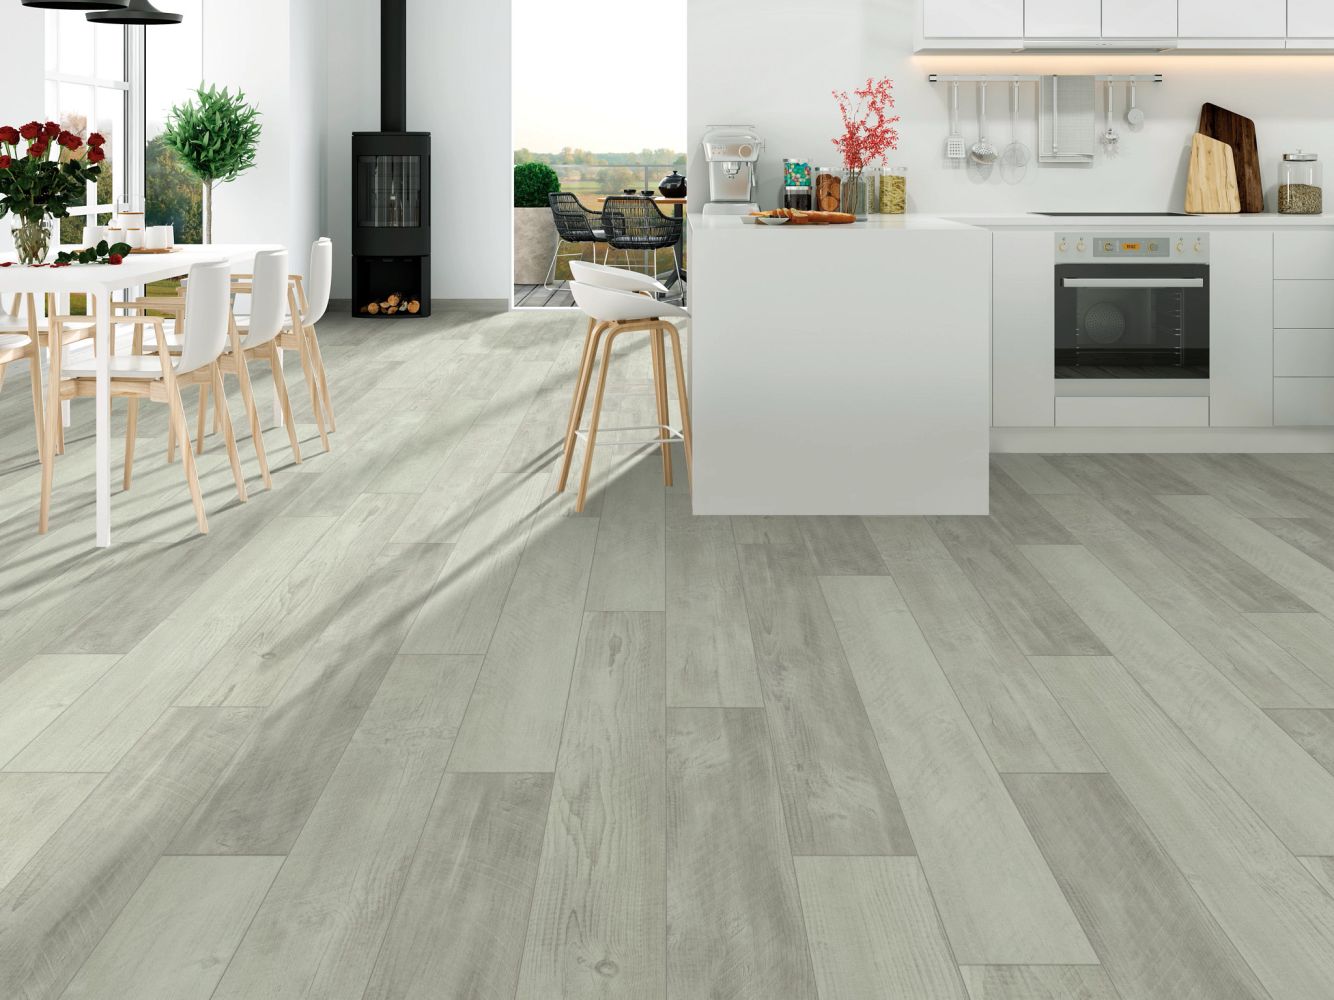 Shaw Floors Resilient Residential Intrepid HD Plus Distressed Pine 00164_2024V